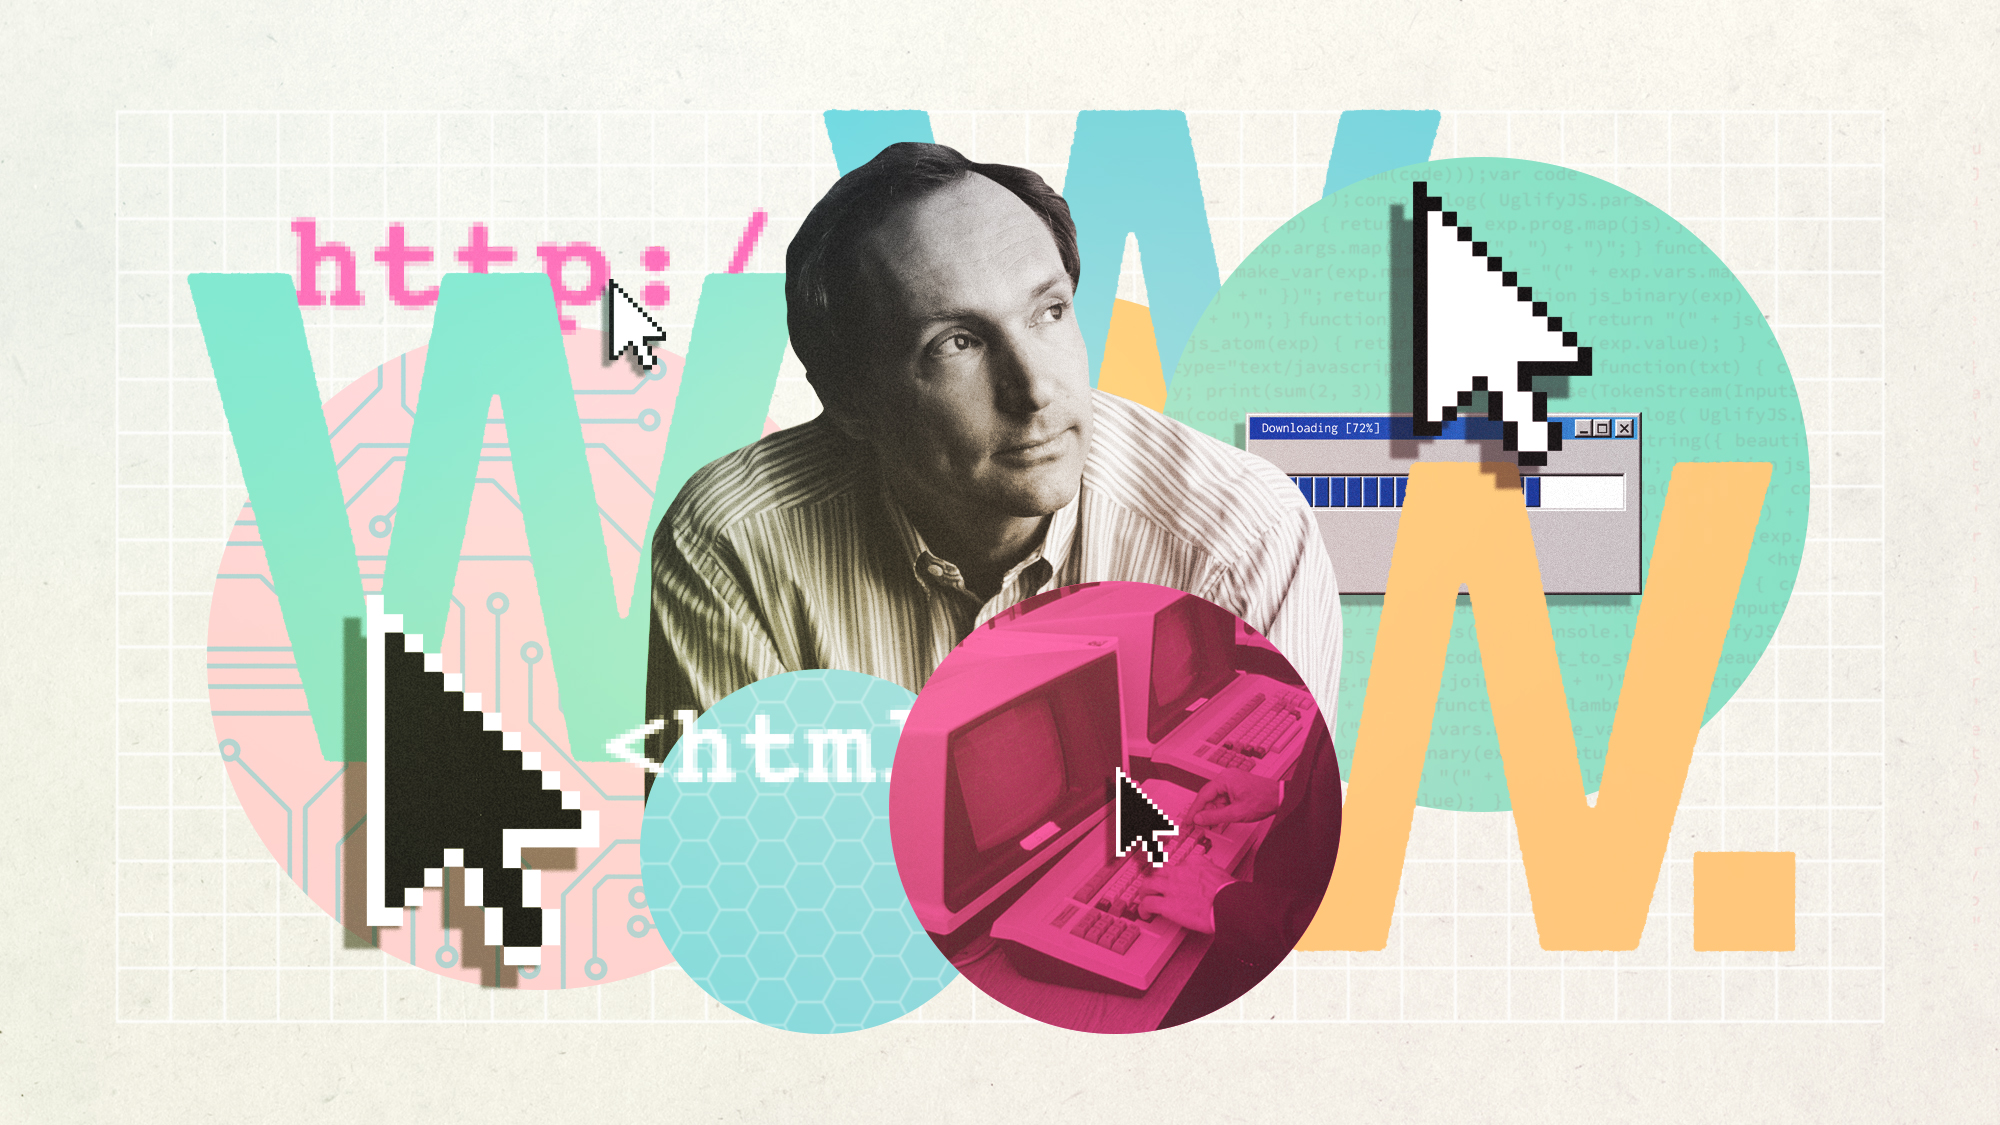 Tim Berners-Lee on founding the World Wide Web 30 years ago